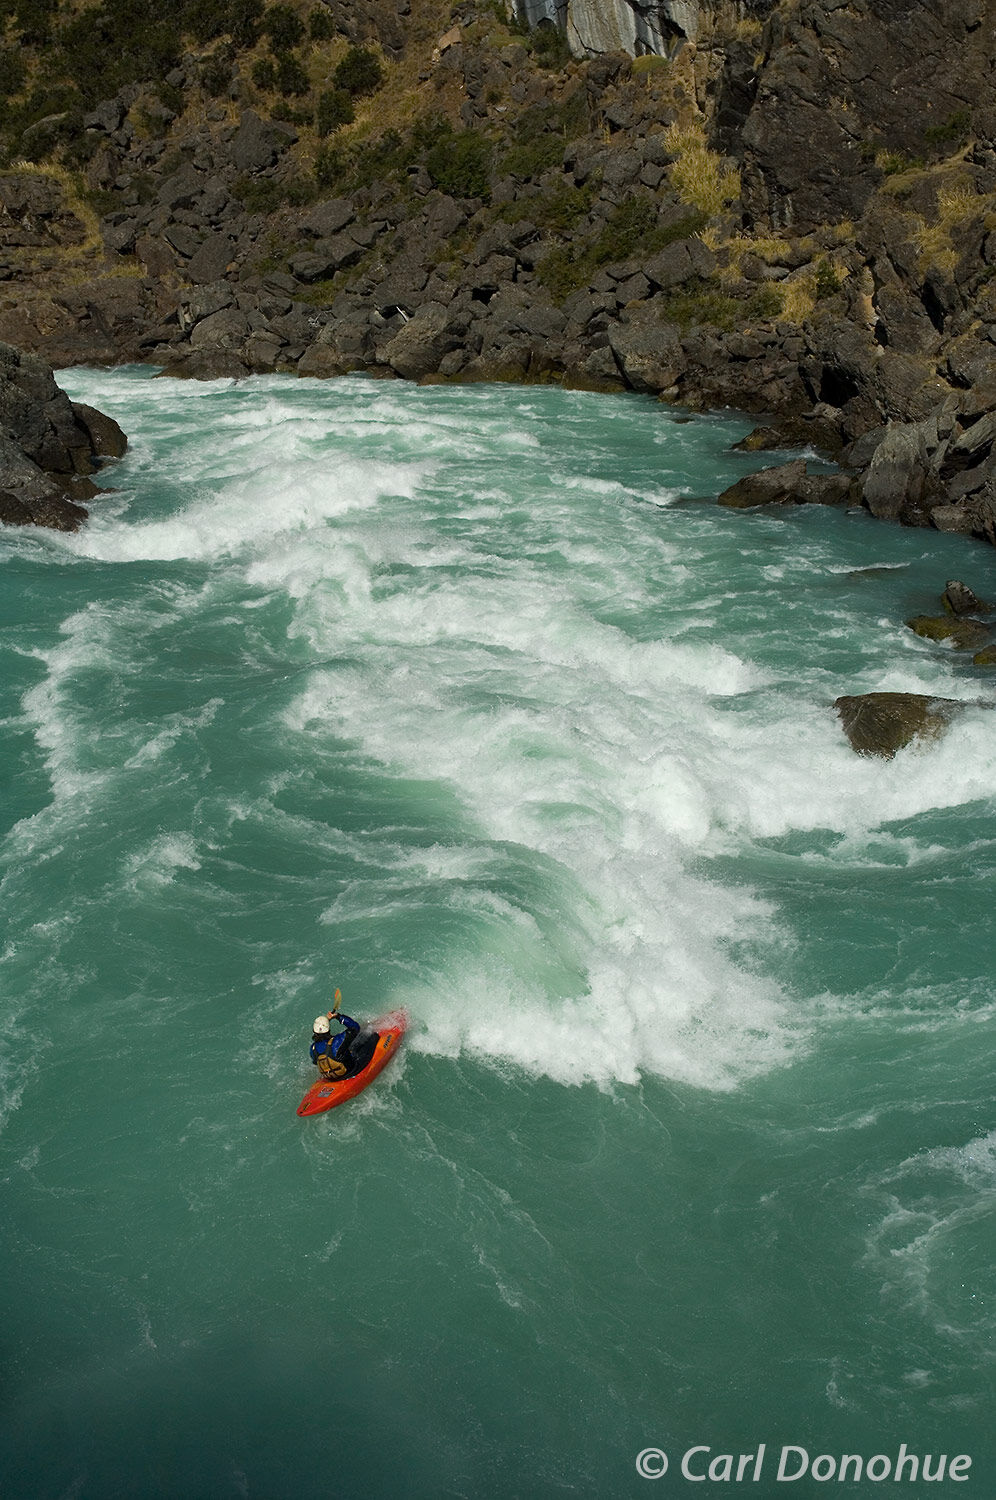 Whitewater kayaking on the Baker River. The 2nd rapid in the canyon, this huge river dwarfs a kayaker as he navigates his way...